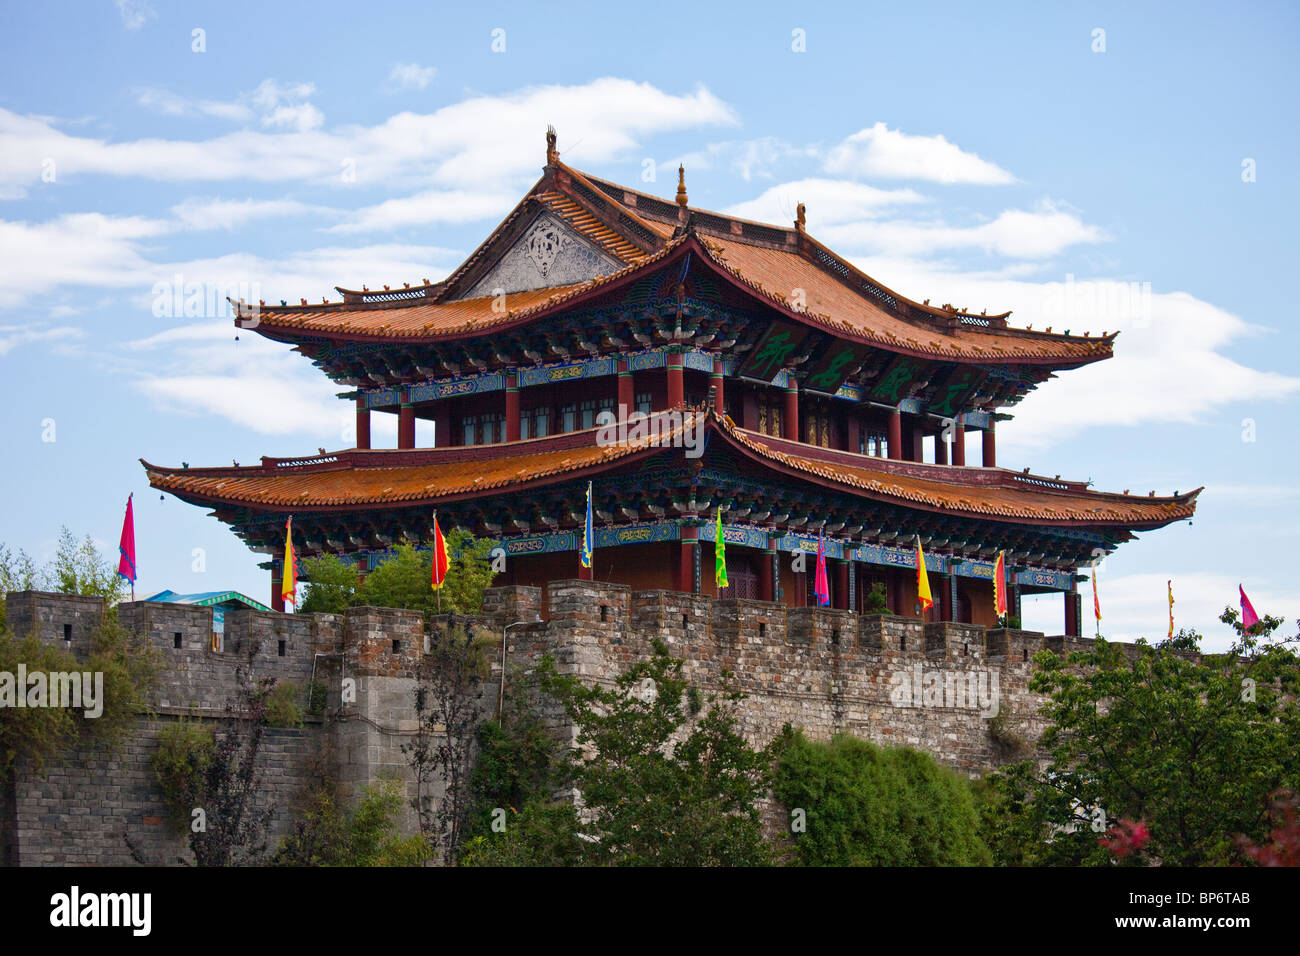 East Gate of the Old City Walls in Dali, China Stock Photo